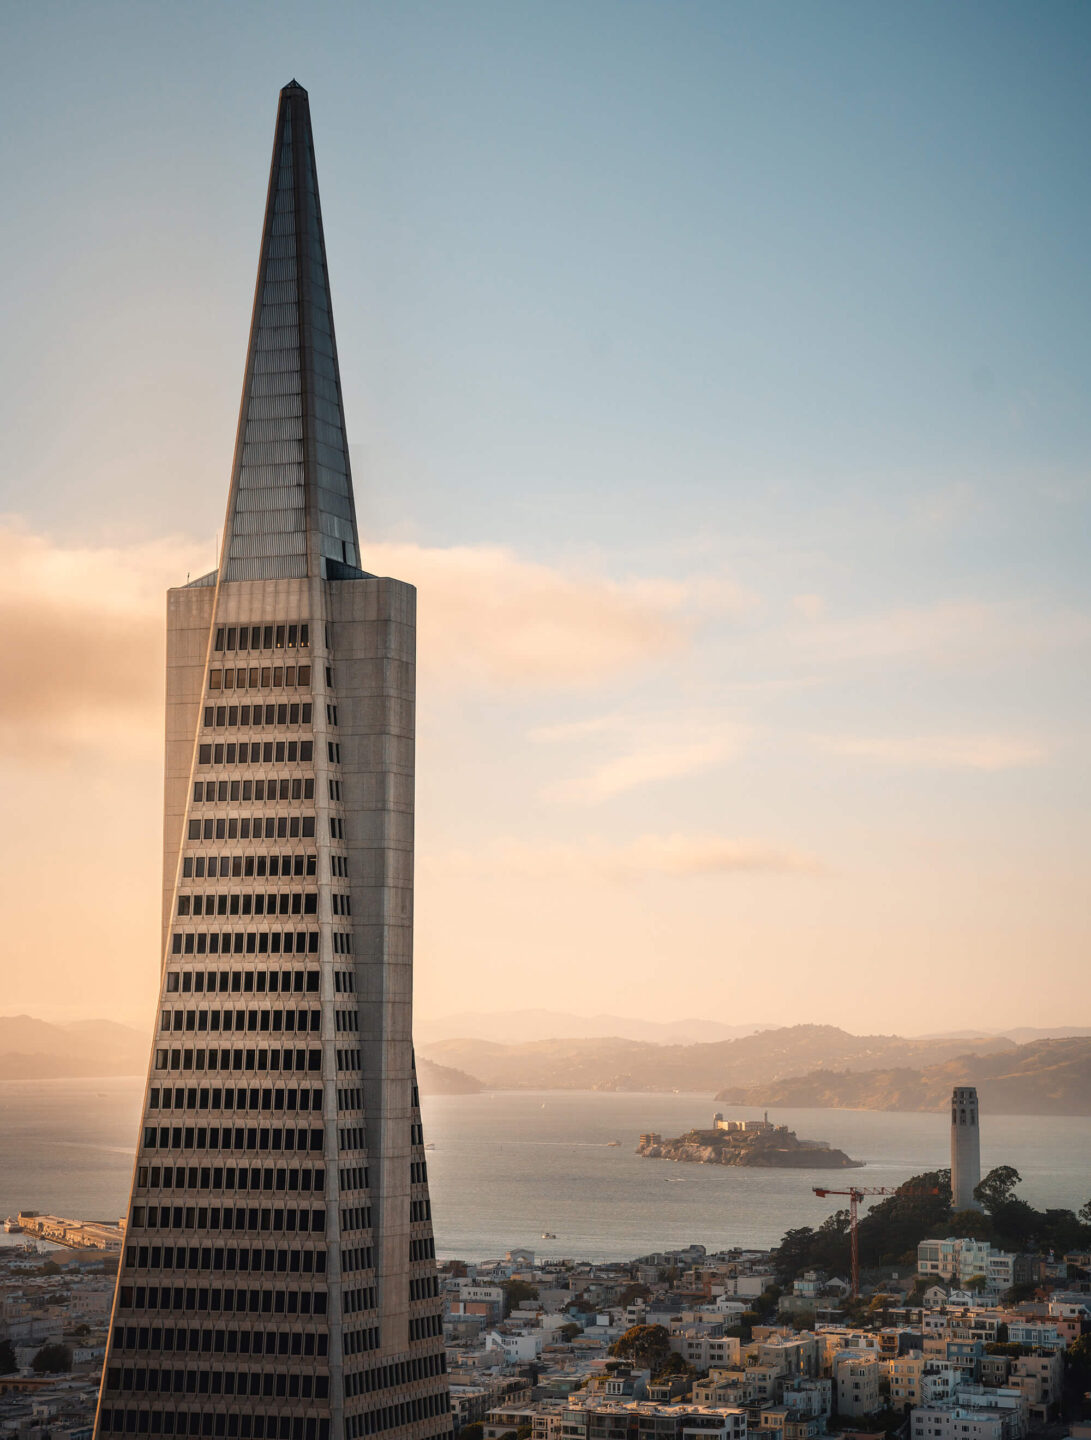 transamerica pyramid with the bay in the background